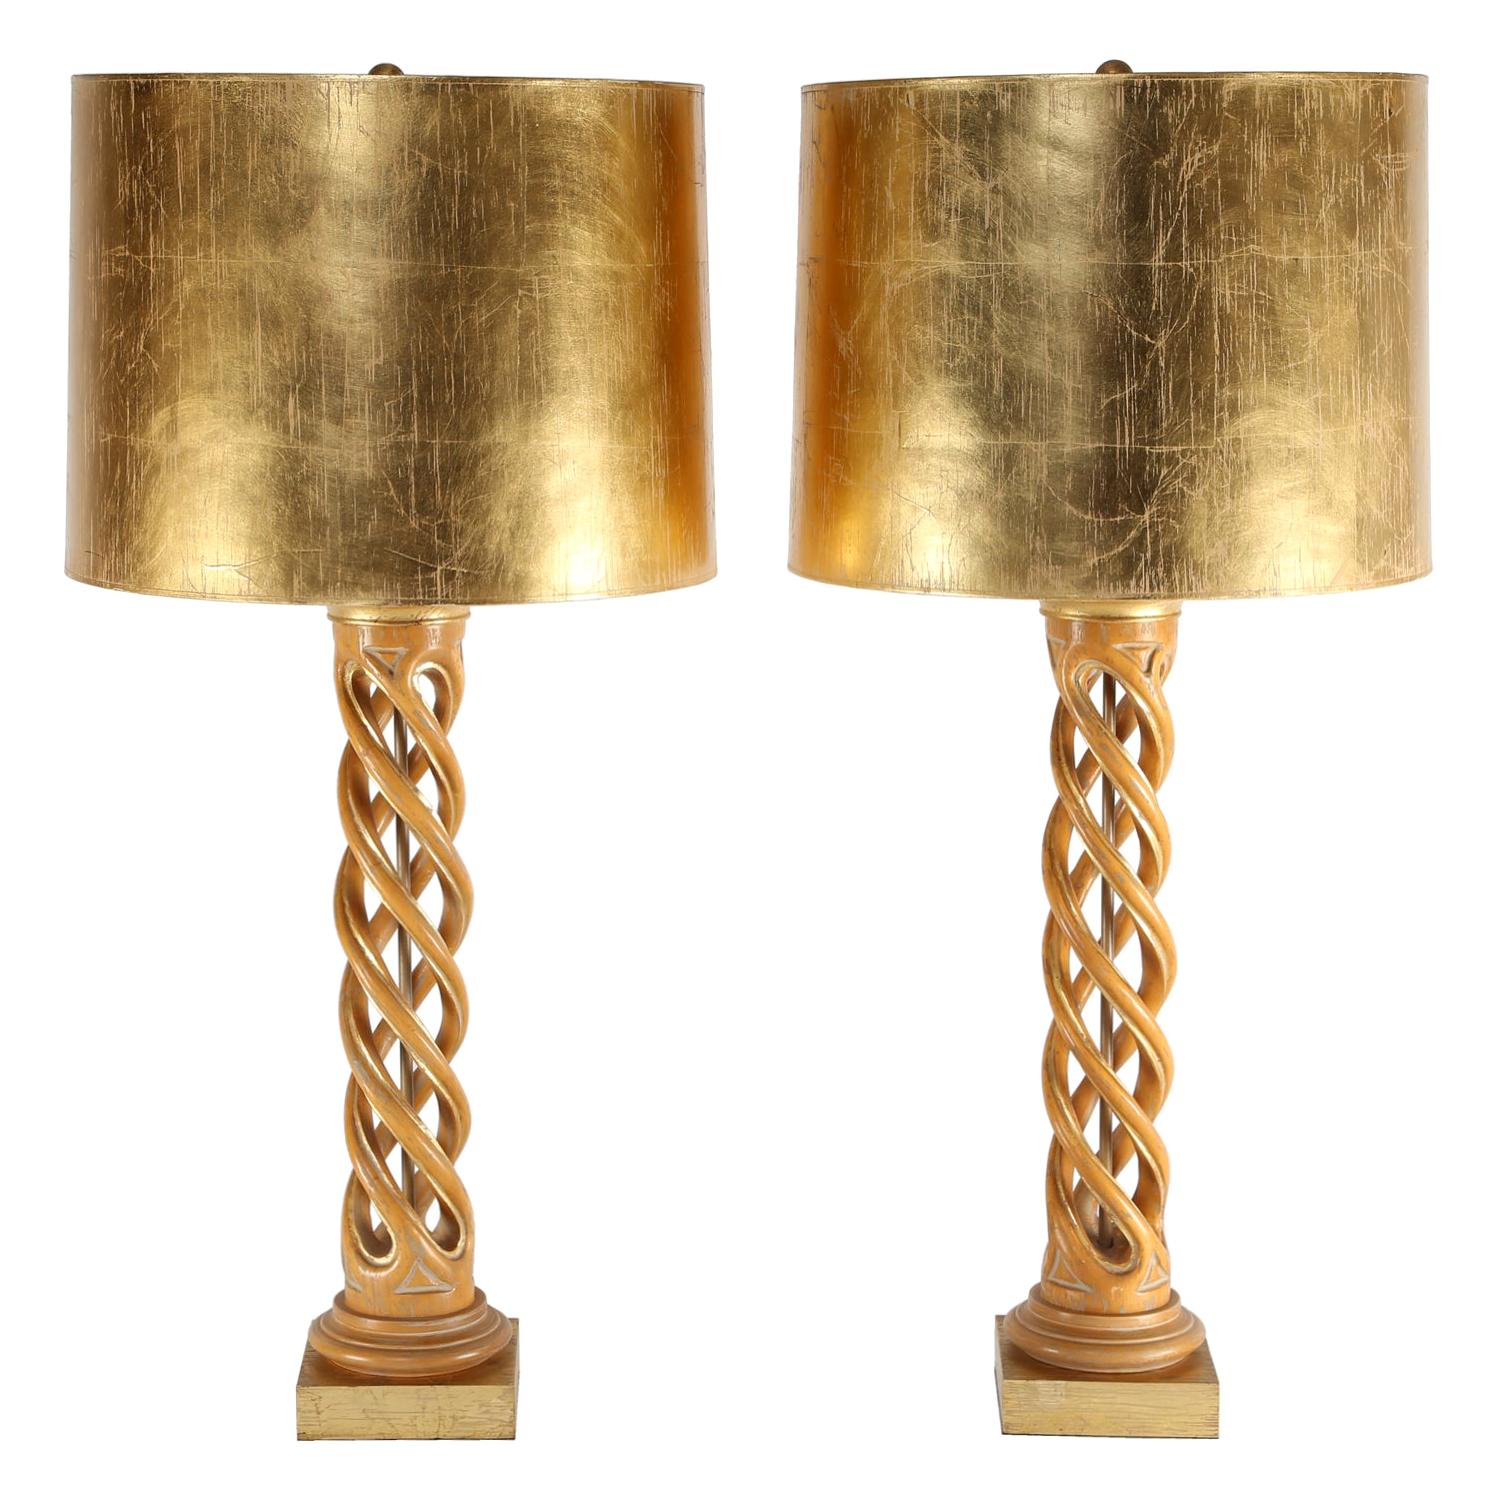 Pair of Monumental Table Lamps in Bleached Mahogany with Gilt Shades, 1950s